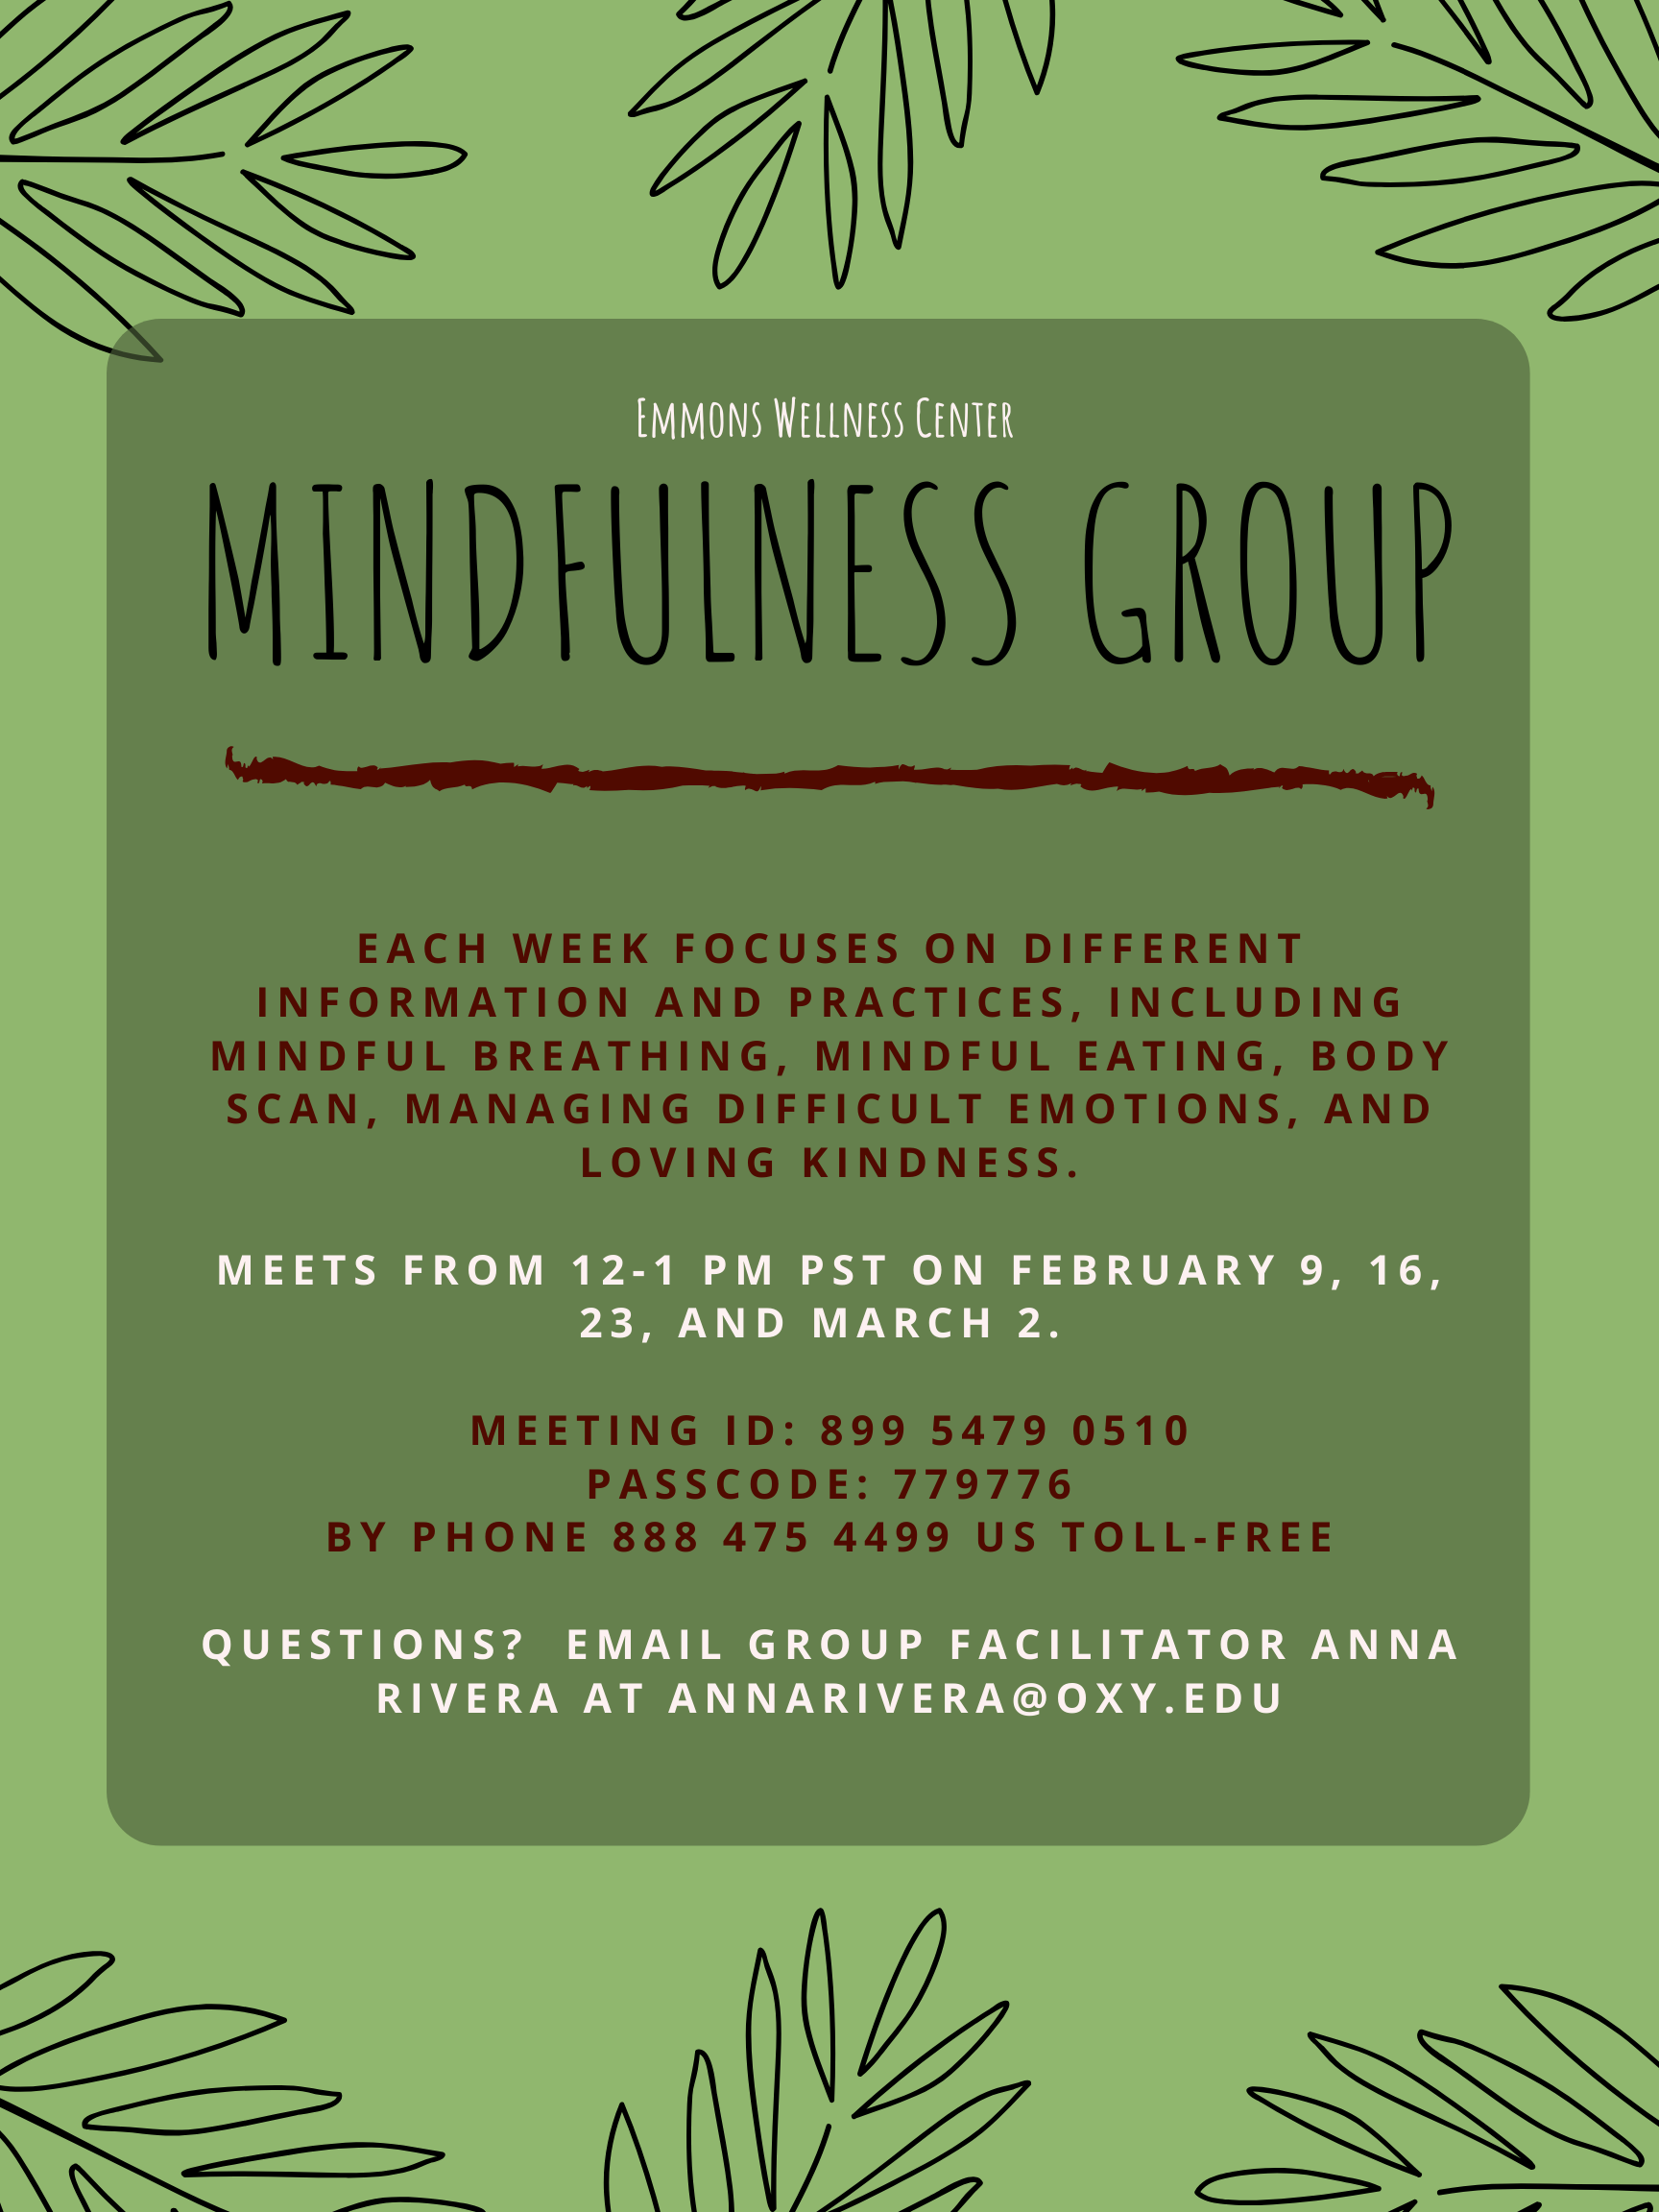 mindfulness group flyer with details about meeting dates, time, contact information